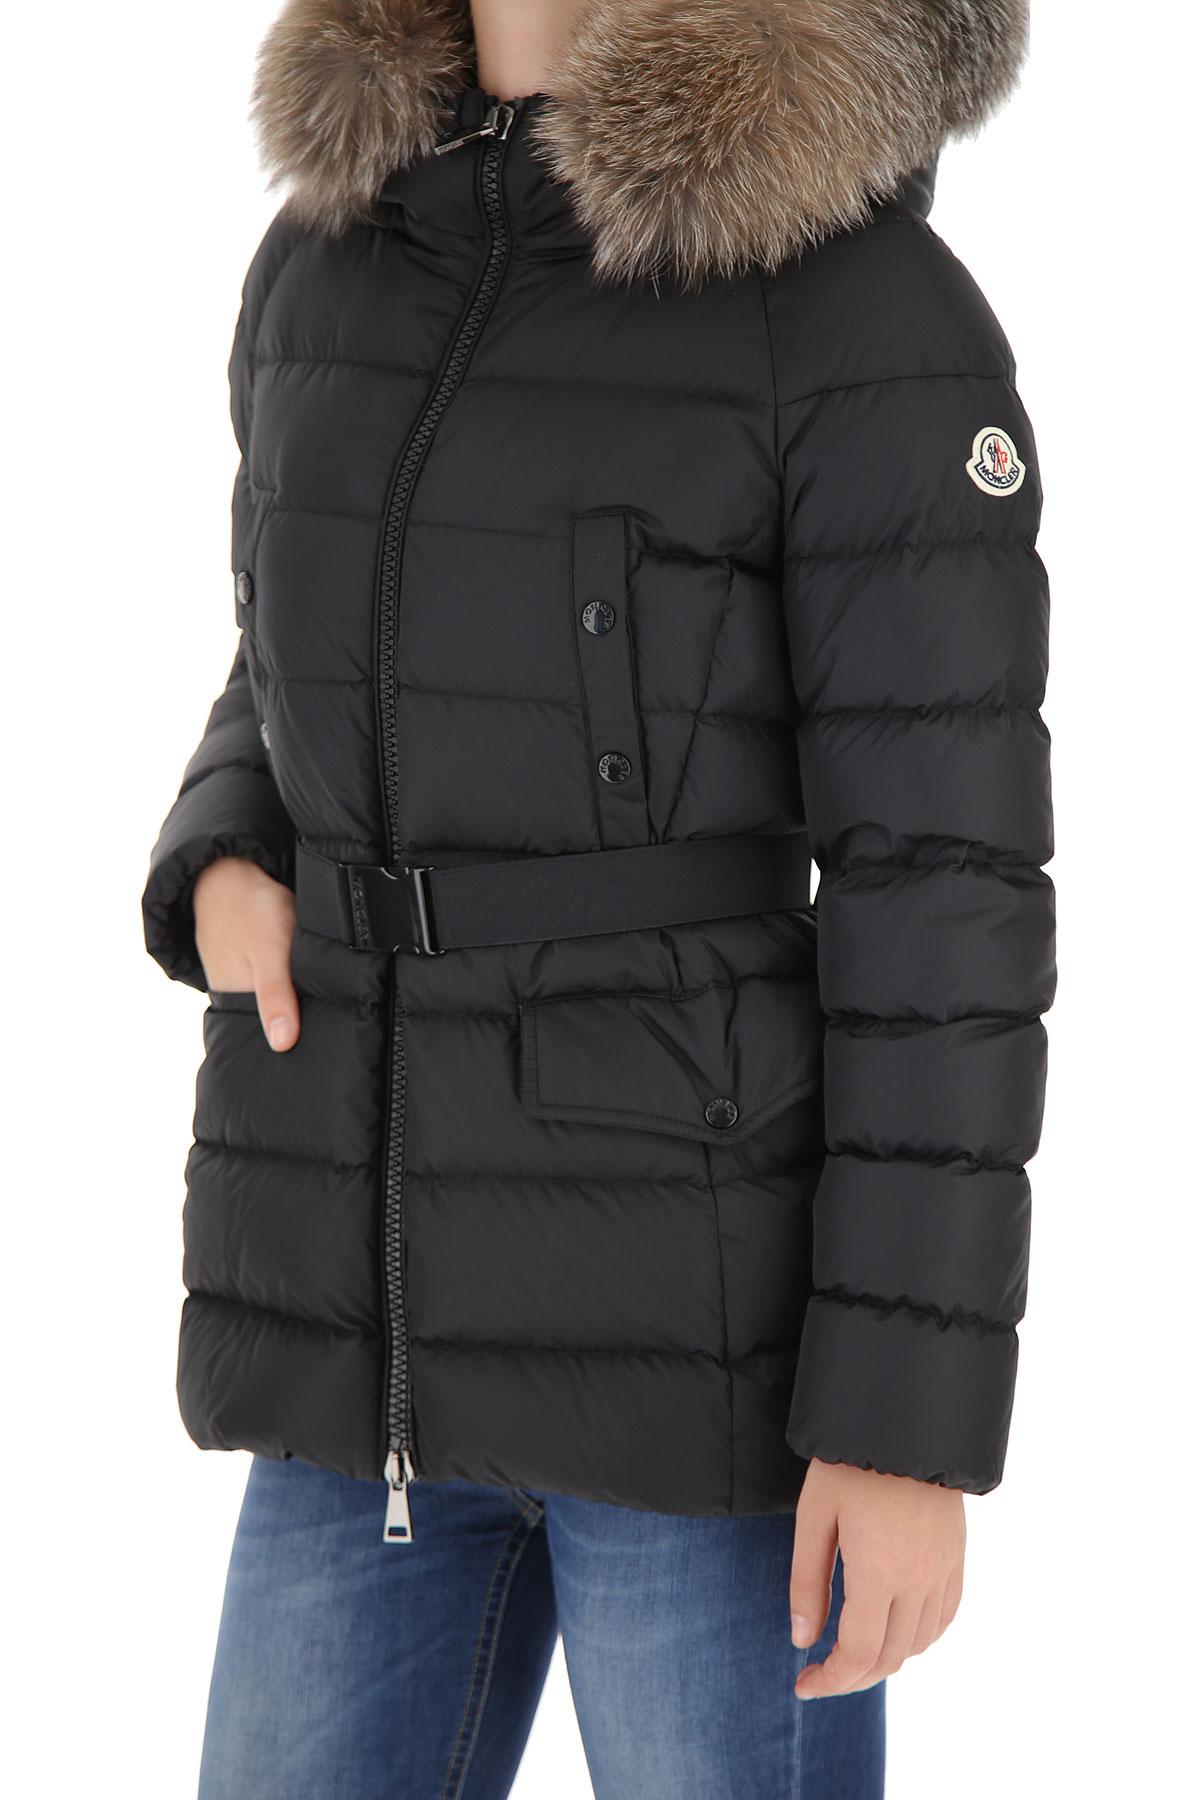 Moncler Synthetic Down Jacket For Women in Black - Lyst